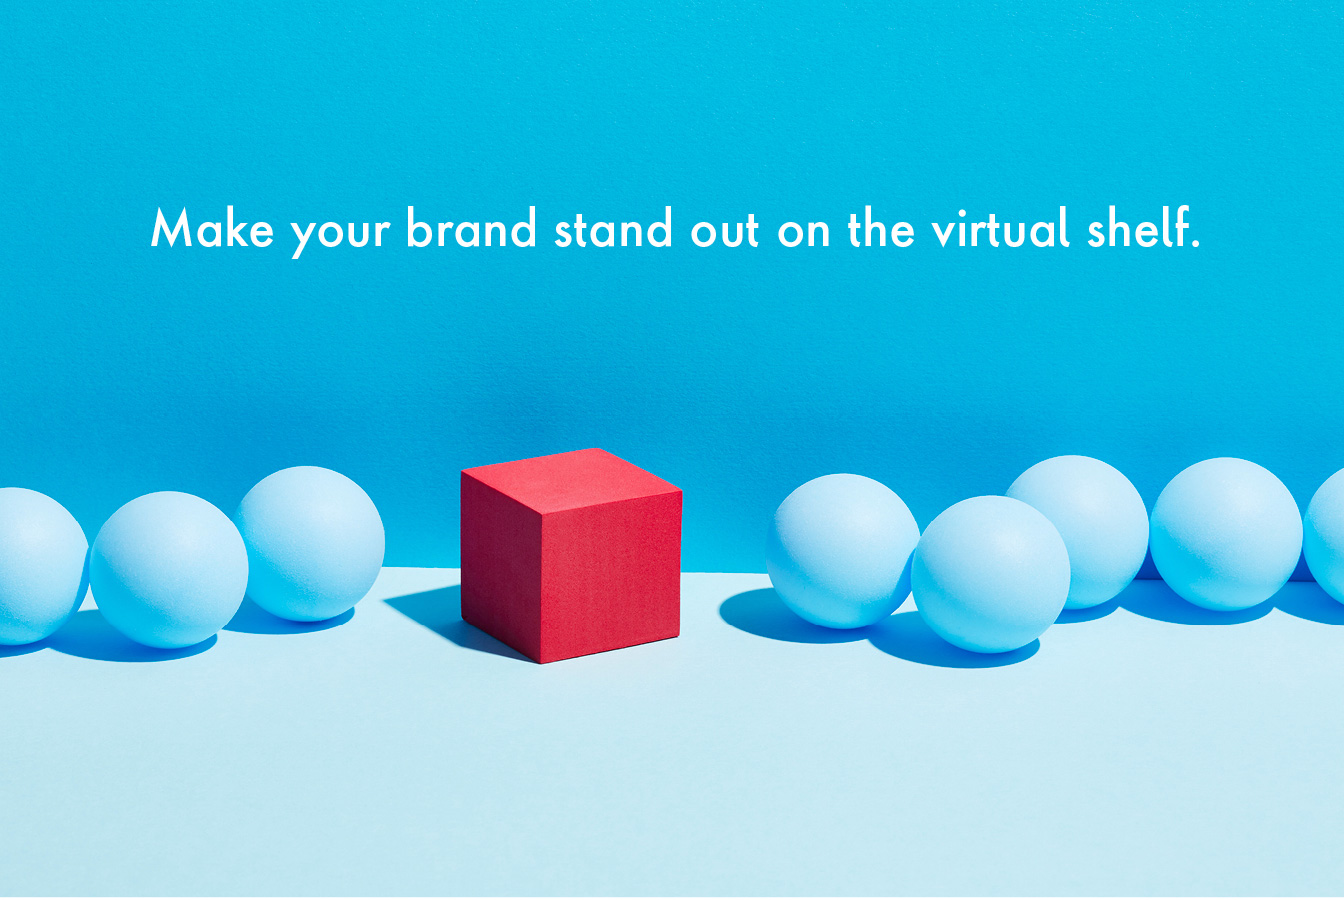 "Make your brand stand out on the virtual shelf"